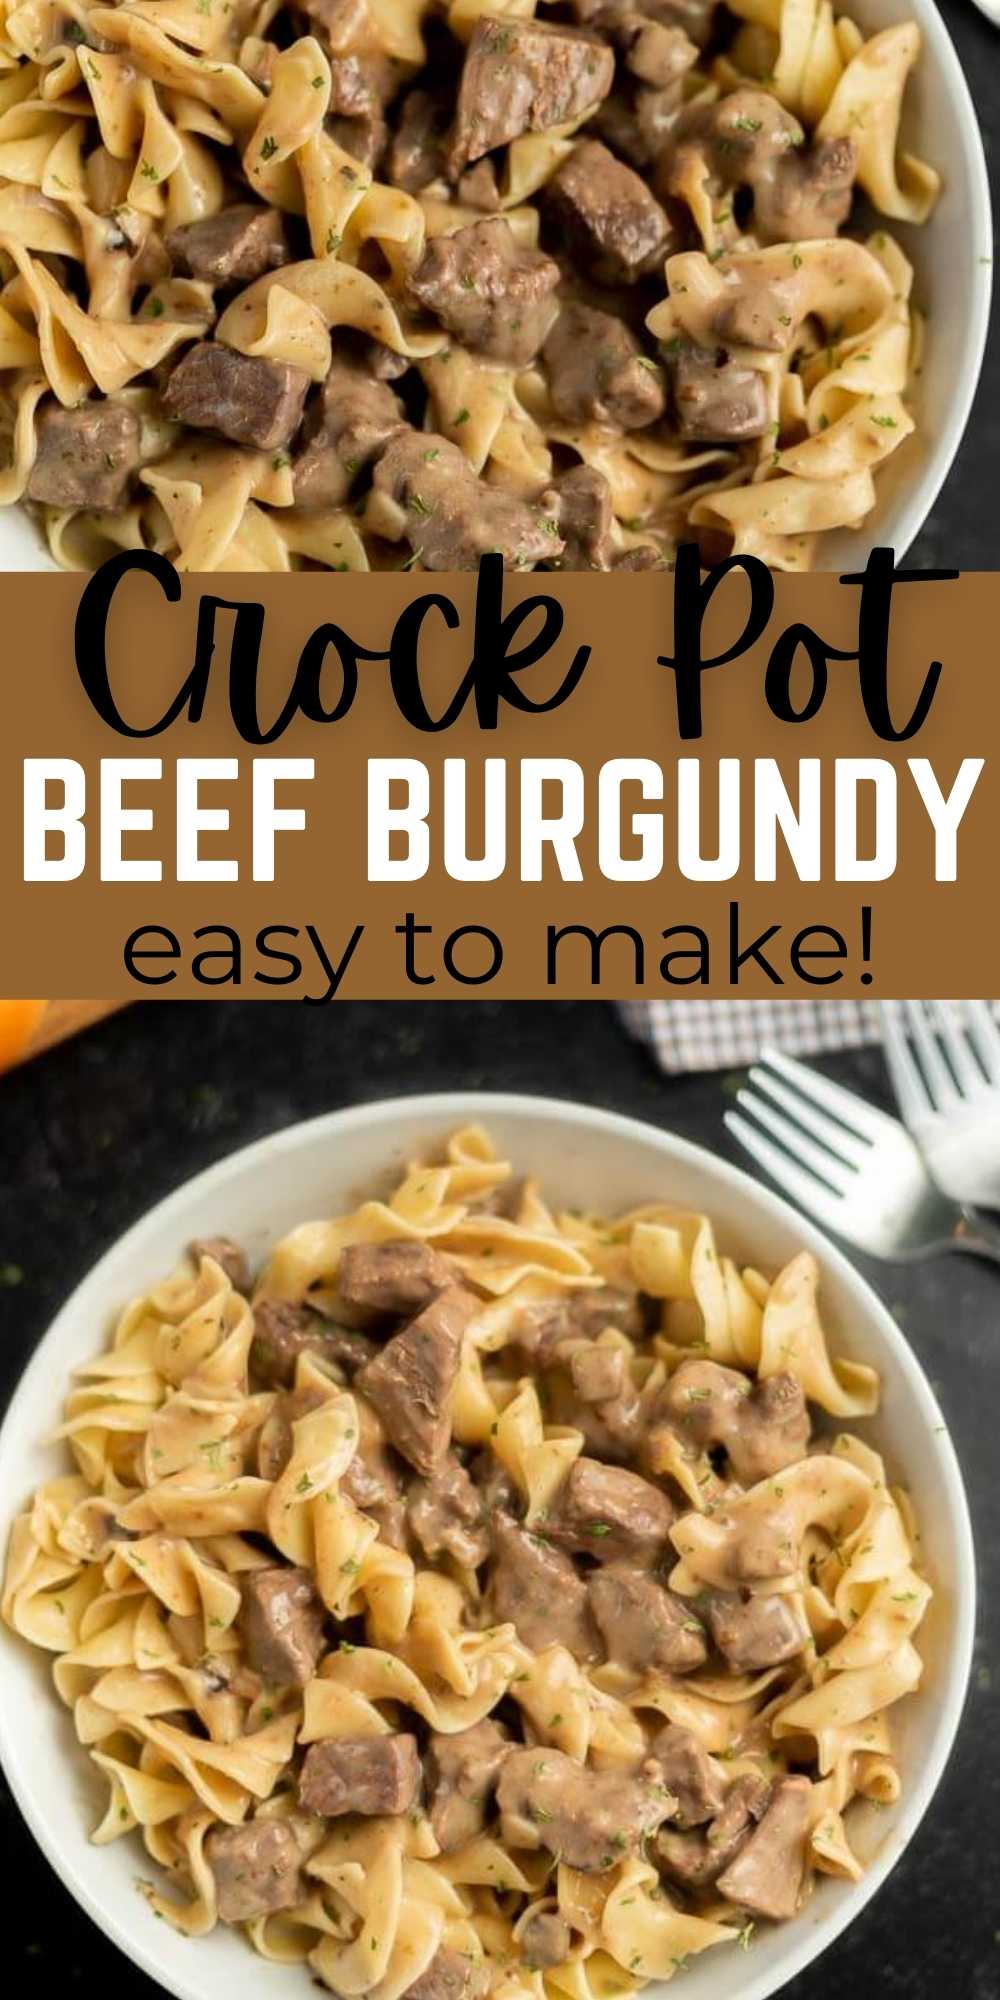 Try Easy Crock Pot Beef Burgundy Recipe for a simple meal with only 4 ingredients. Beef Burgundy Slow Cooker Recipe has a rich flavor sure to impress! You are going to love this slow cooker beef burgundy recipe that is super easy to make too! #eatingonadime #crockpotrecipes #slowcookerrecipes #beefrecipes 
